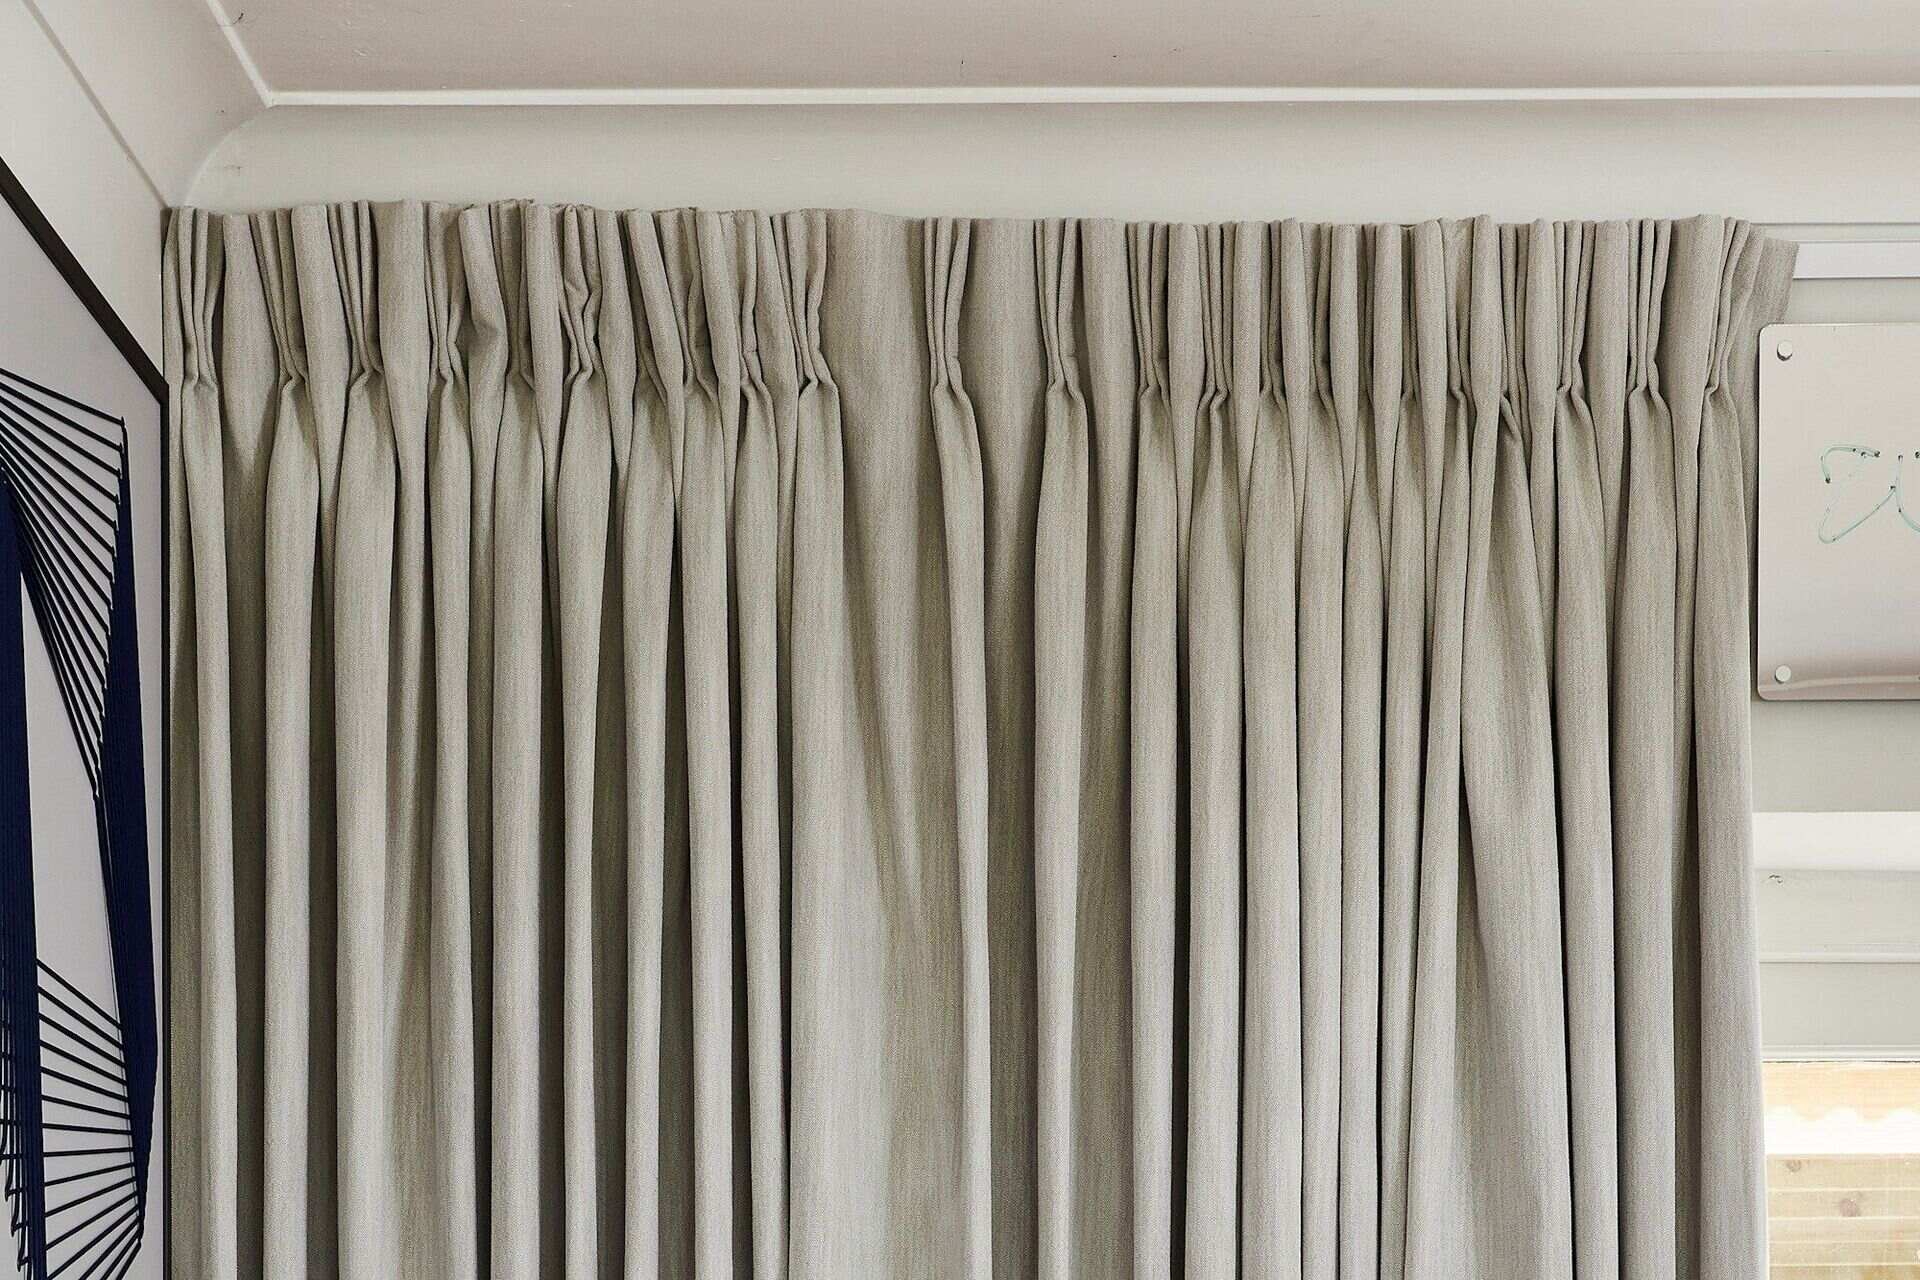 How To Pinch Pleat IKEA Curtains - Decor Hint